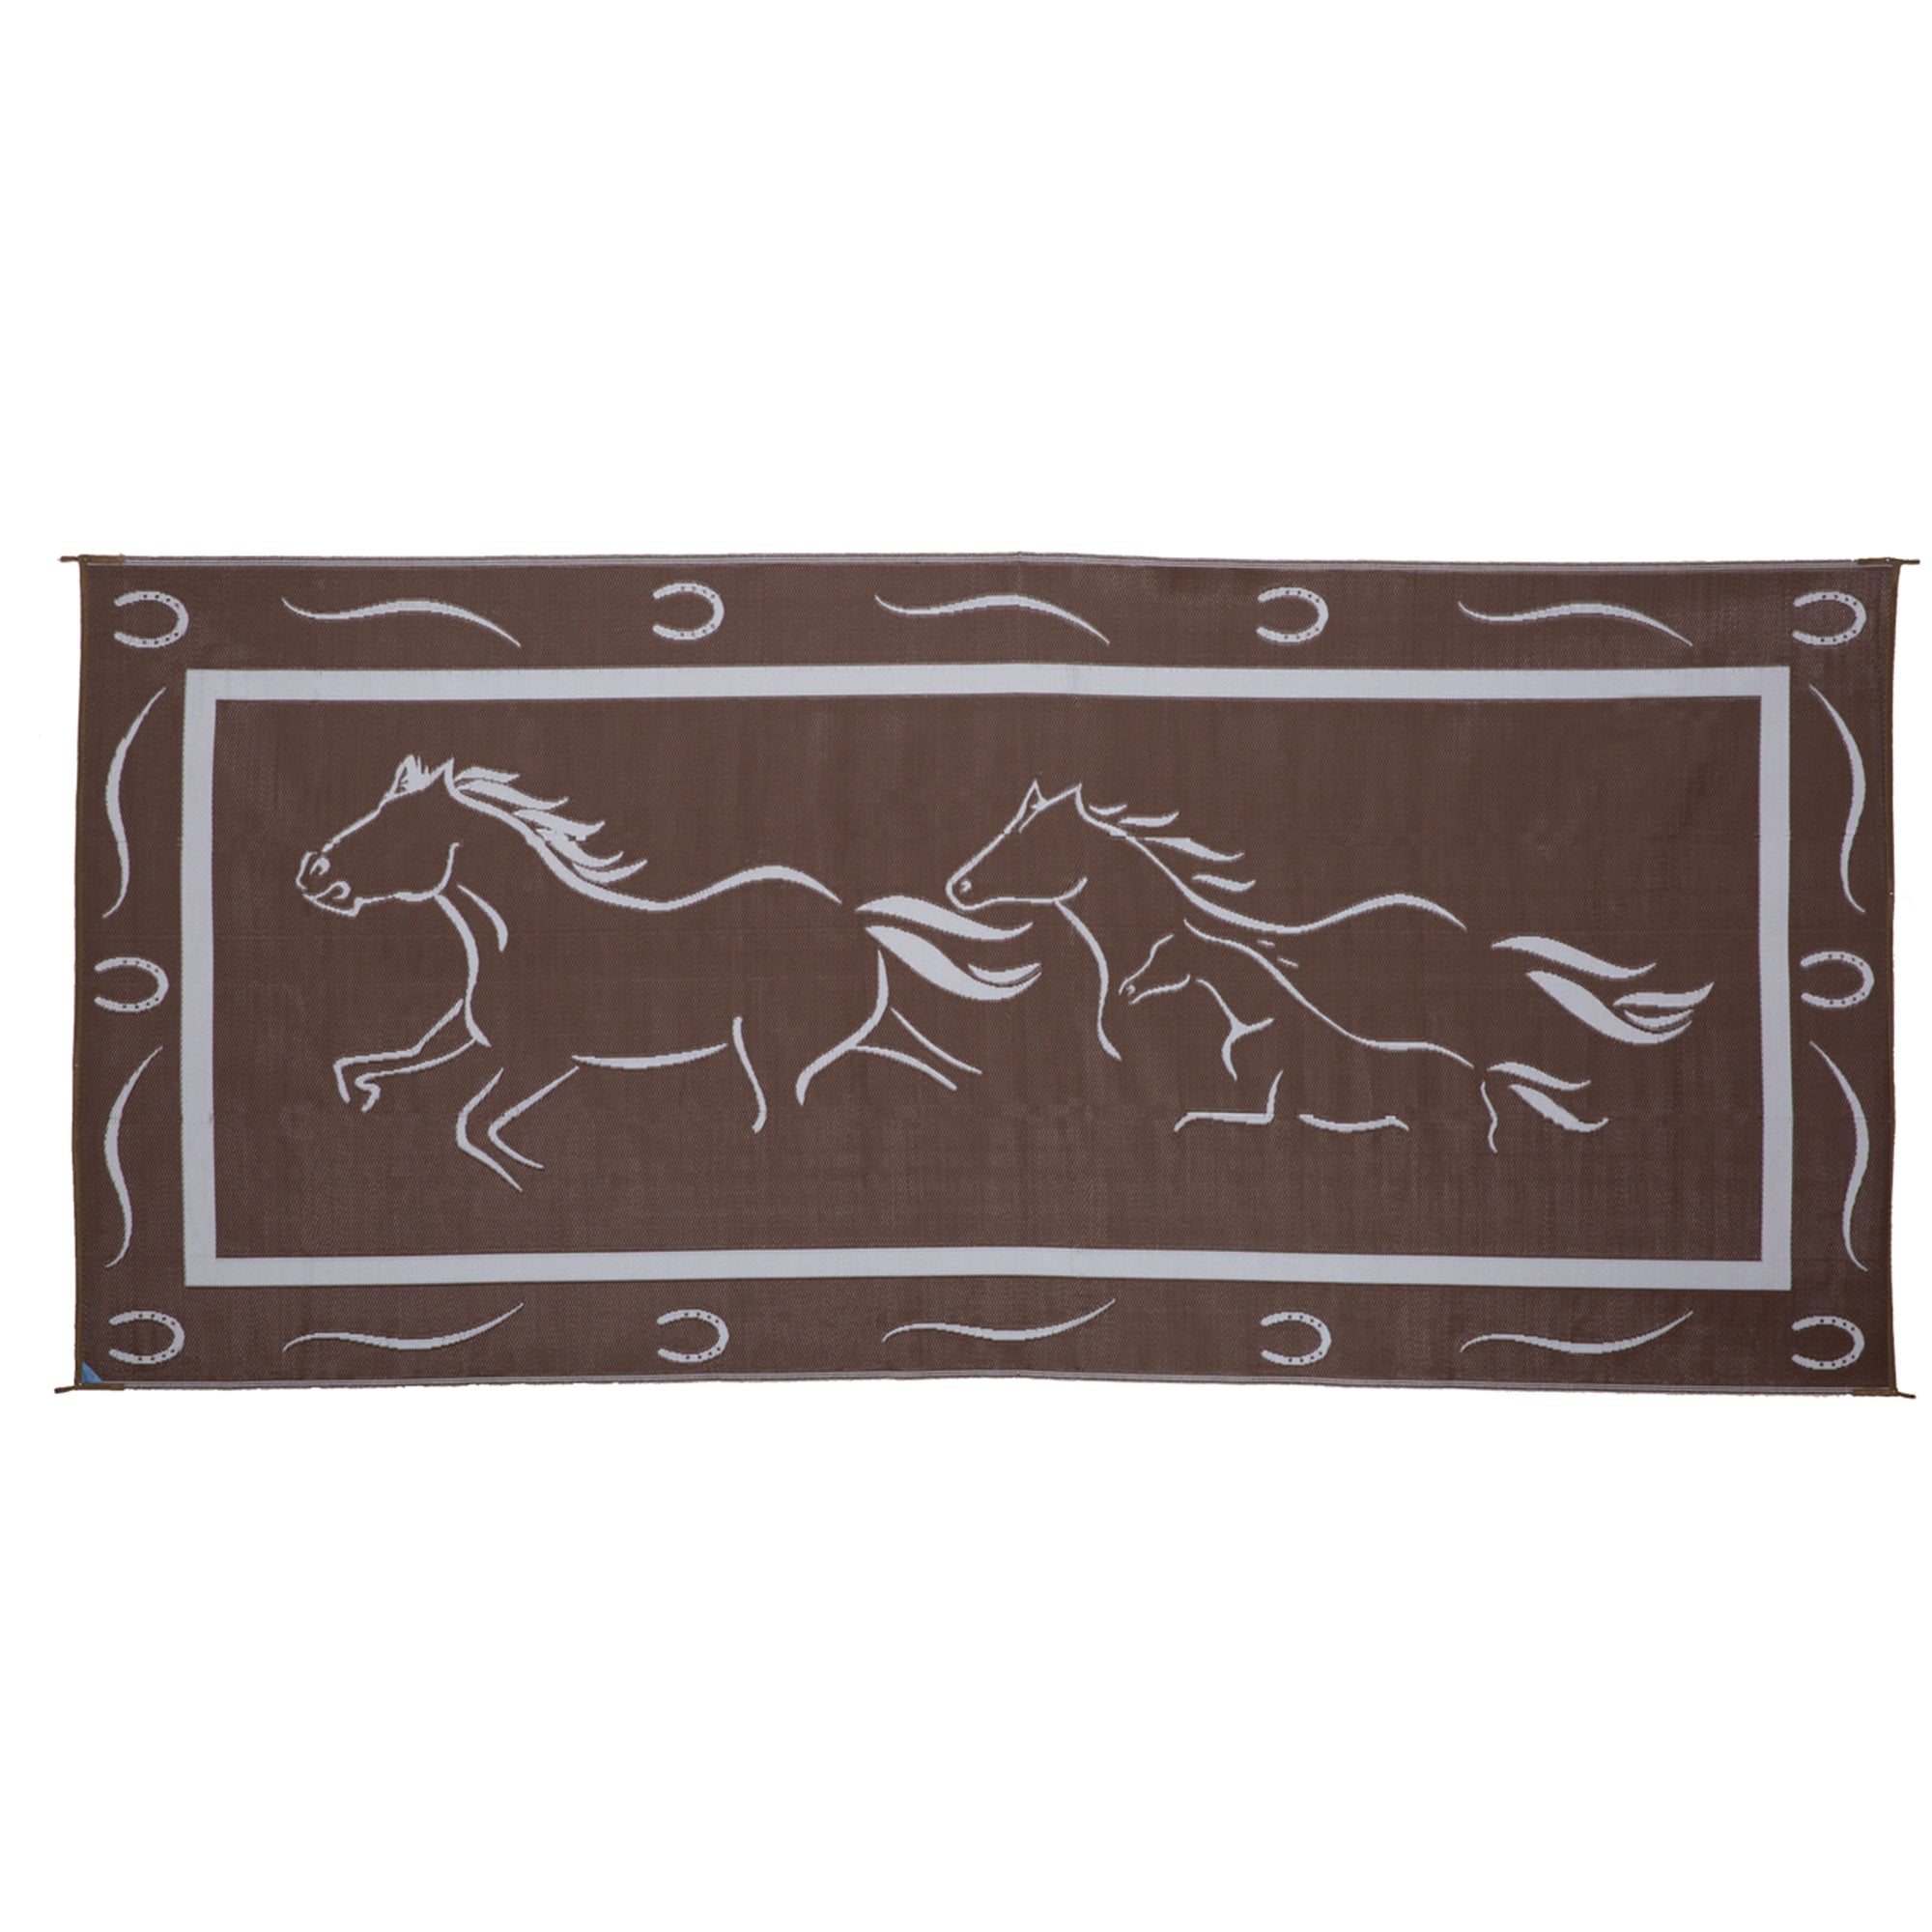 Ming's Mark GH8117 Stylish Camping Reversible Galloping Horses Patio Mat - 8' x 11', Brown/White